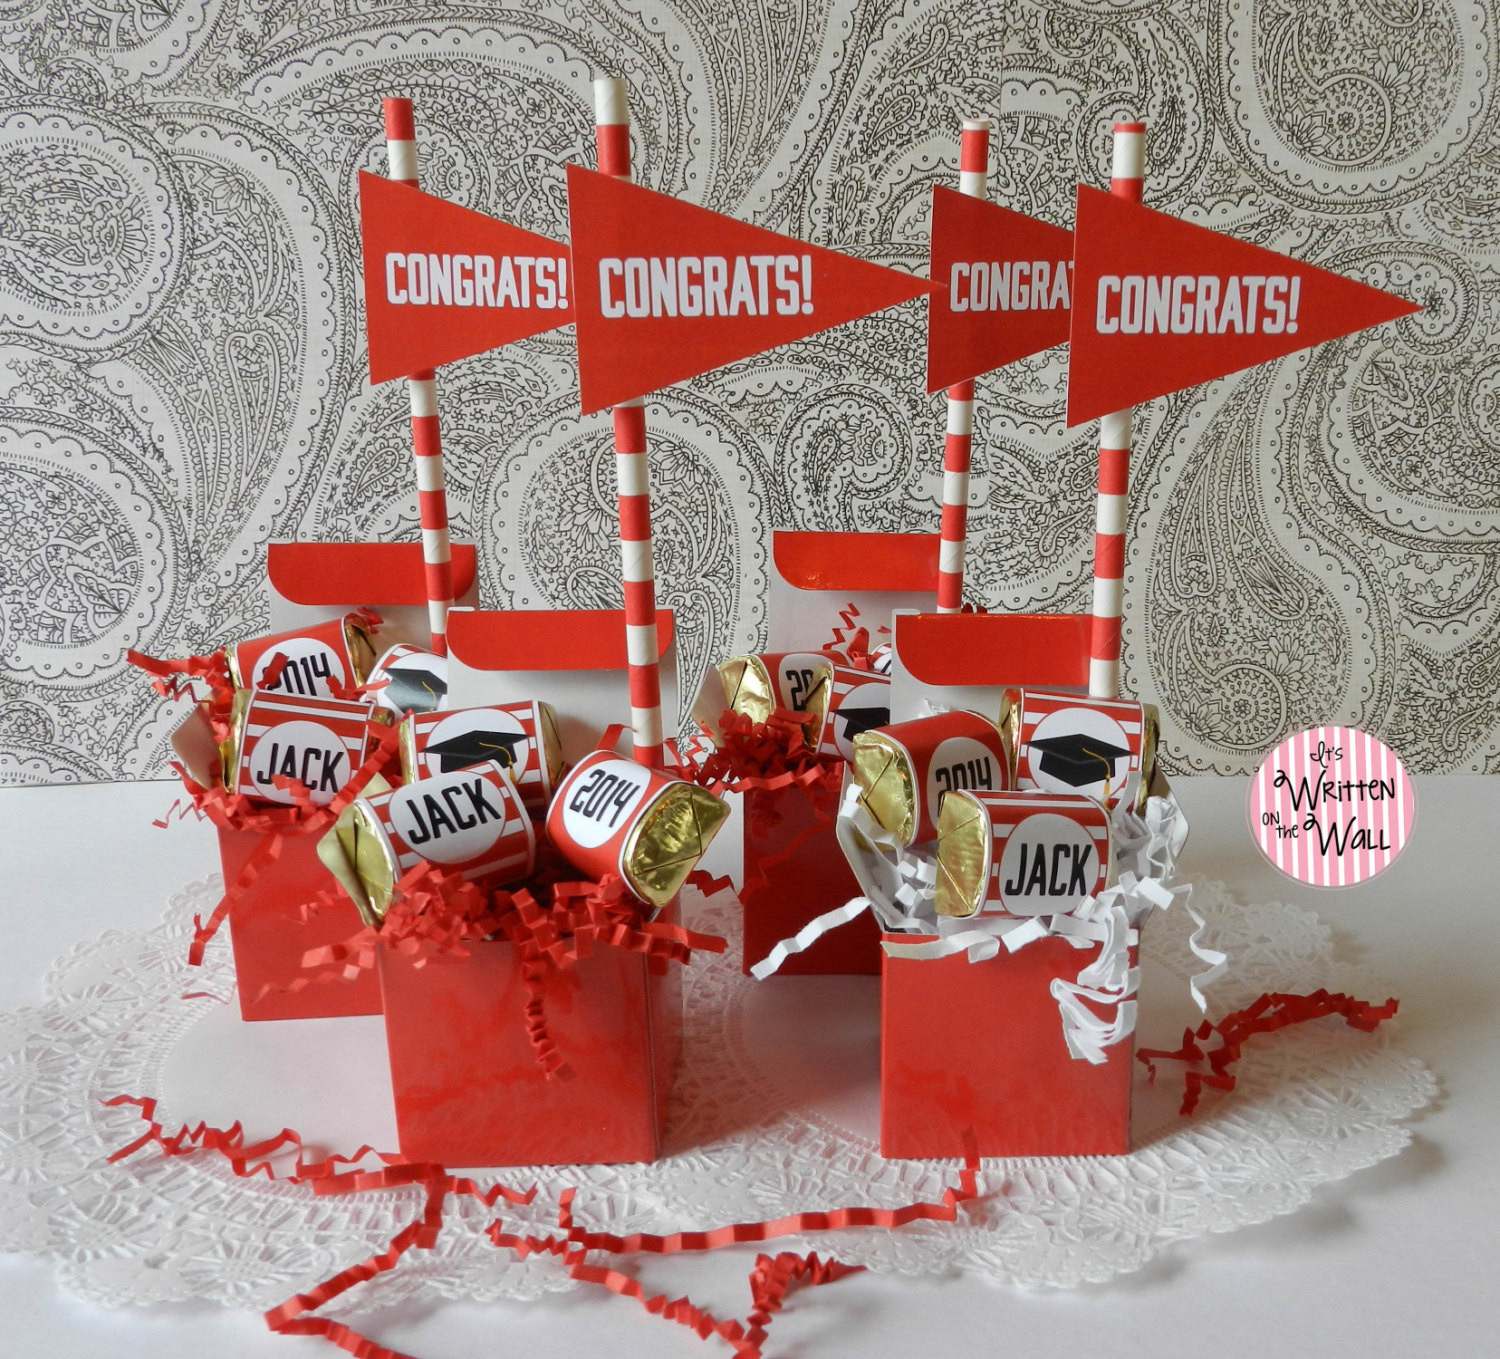 Graduation Party Favors Ideas
 Personalized Graduation Party Favor by ItsWritten TheWall